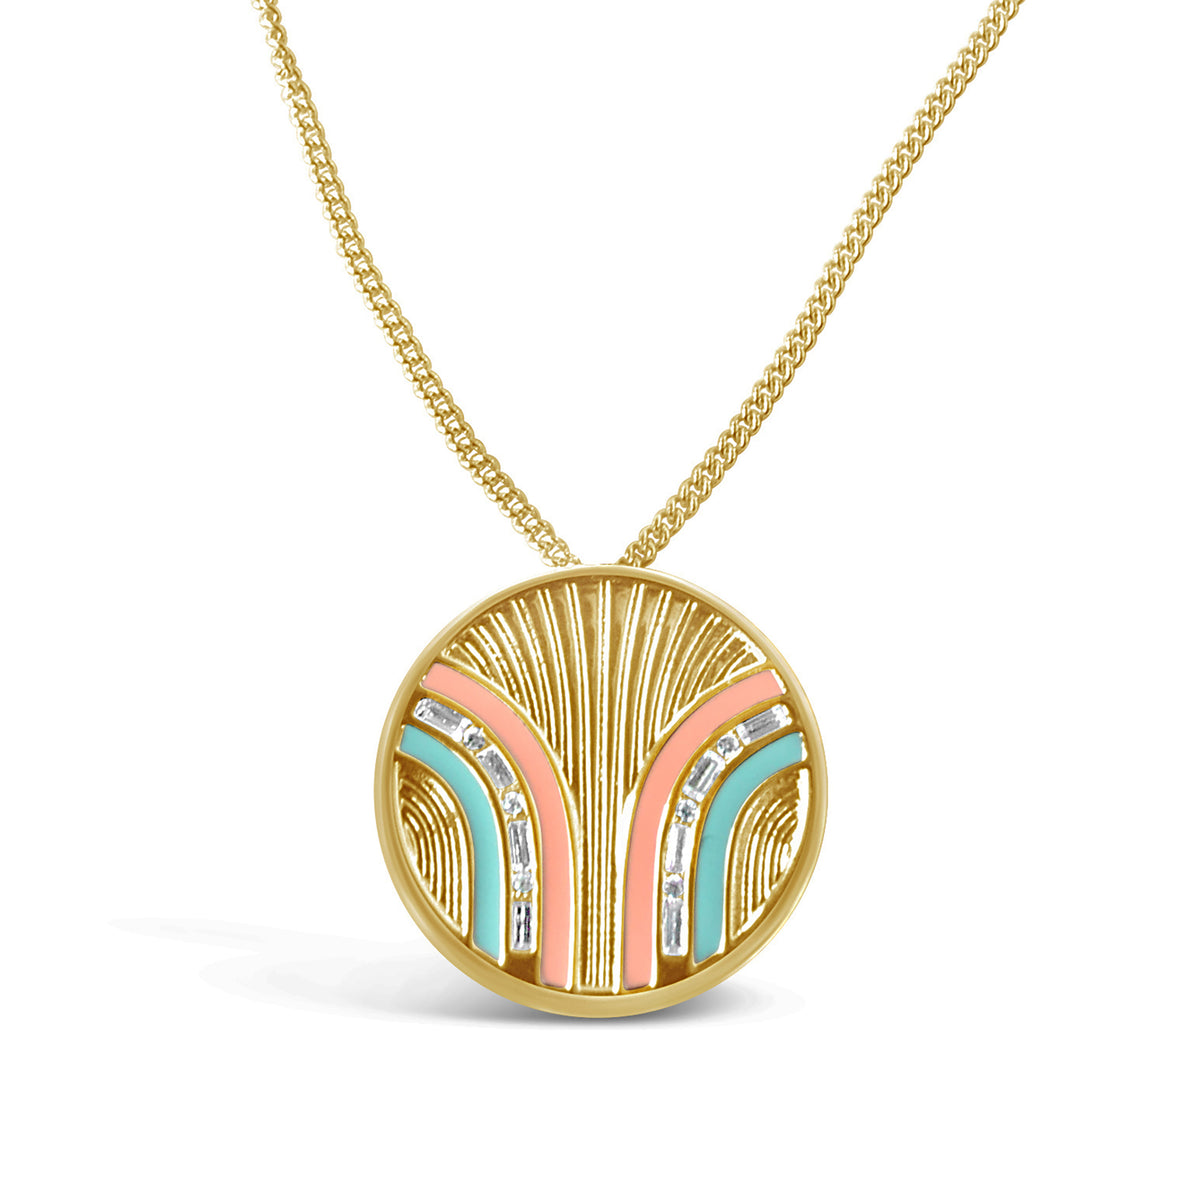 South Beach Coin Necklace - Coral/Mint